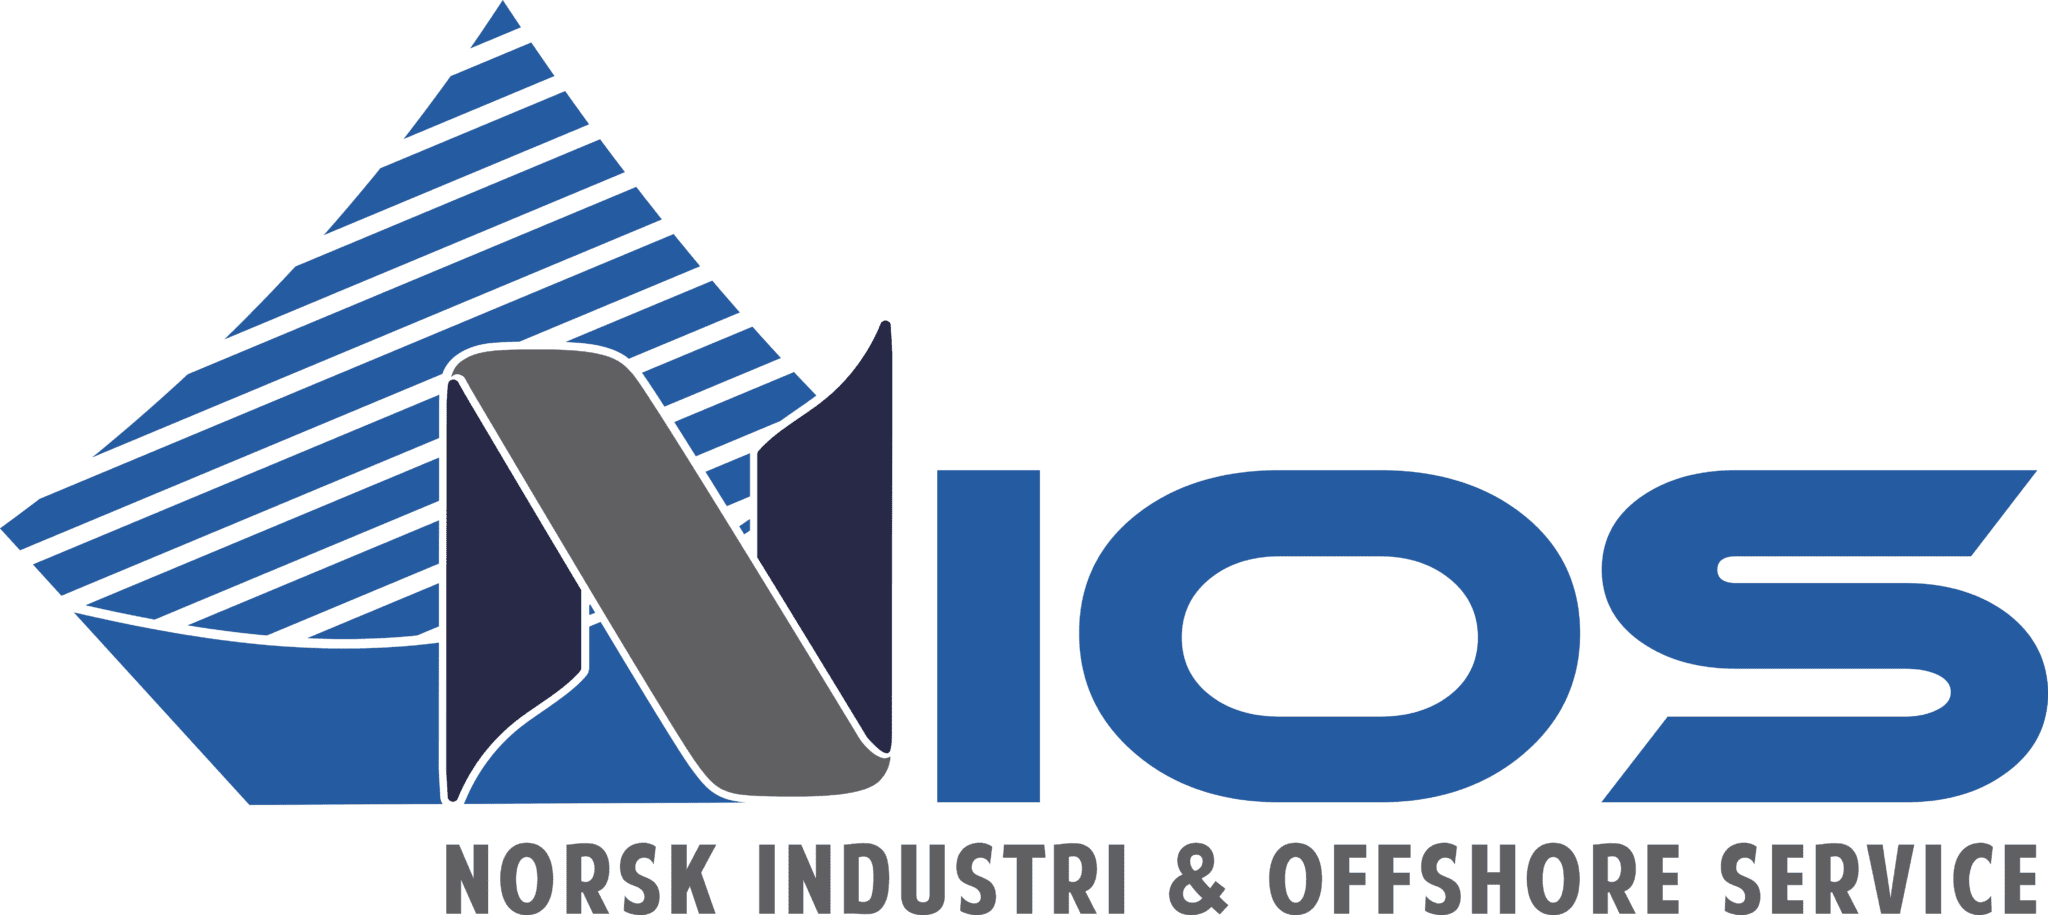 Norsk Industri & Offshore Service